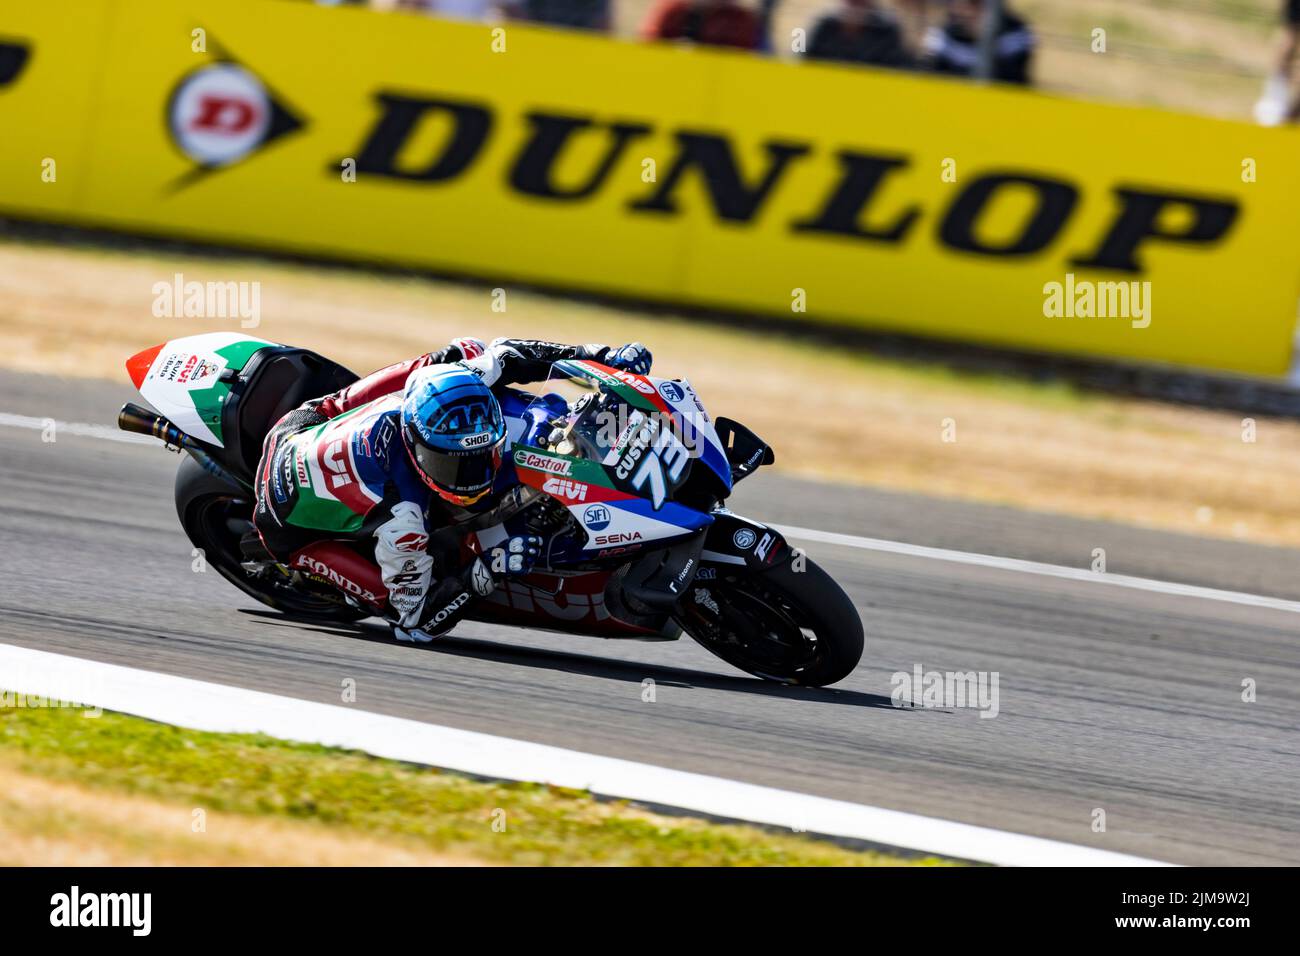 Silverstone, UK. 5th August 2022;  Silverstone Circuit, Silverstone, Northamptonshire, England: British MotoGP Grand Prix, Free Practice: Number 73 LCR Honda Castrol bike ridden by Alex Marquez during free practice at the British MotoGP Credit: Action Plus Sports Images/Alamy Live News Stock Photo